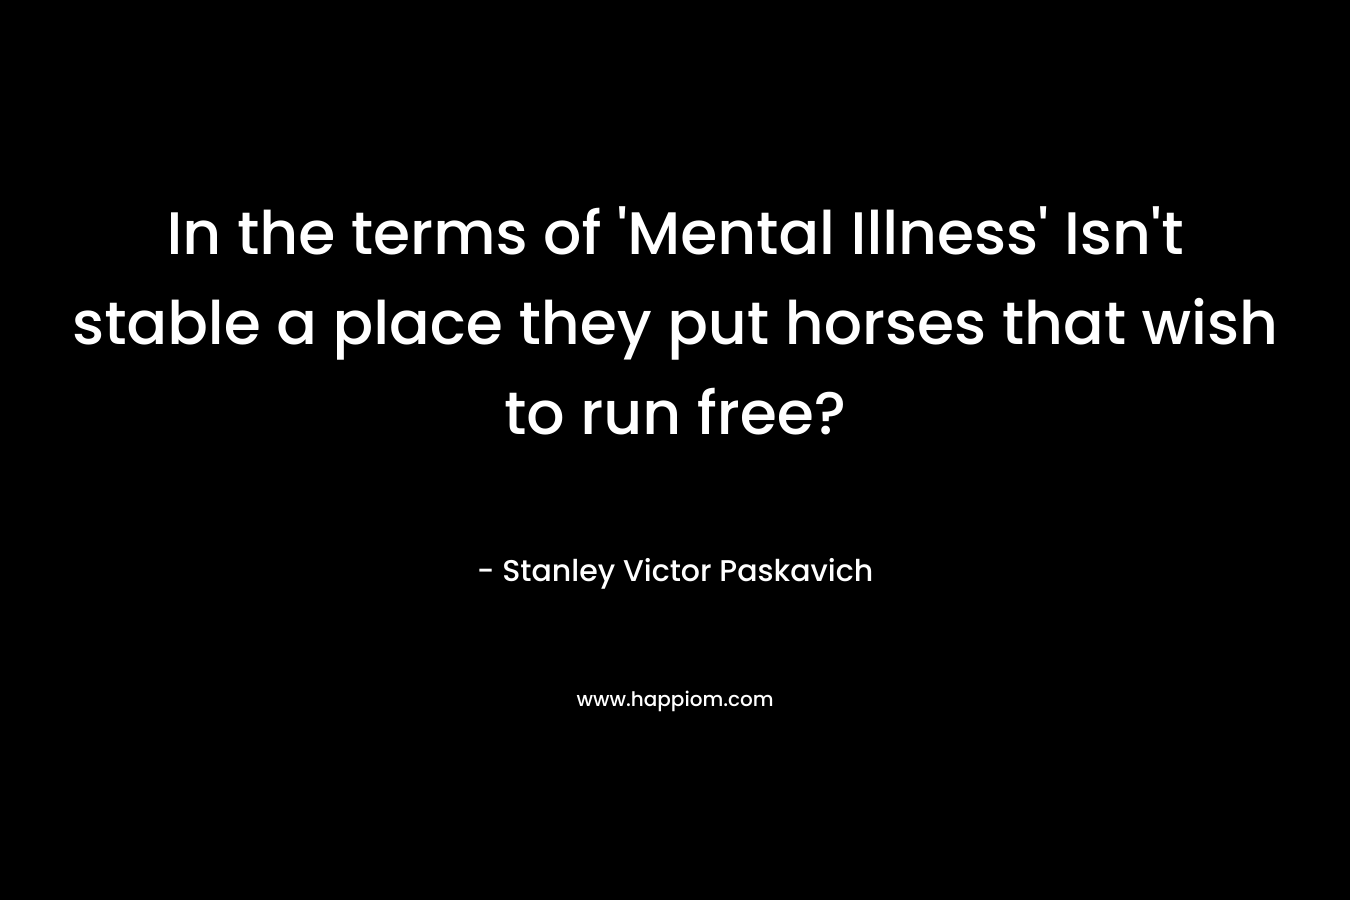 In the terms of 'Mental Illness' Isn't stable a place they put horses that wish to run free?